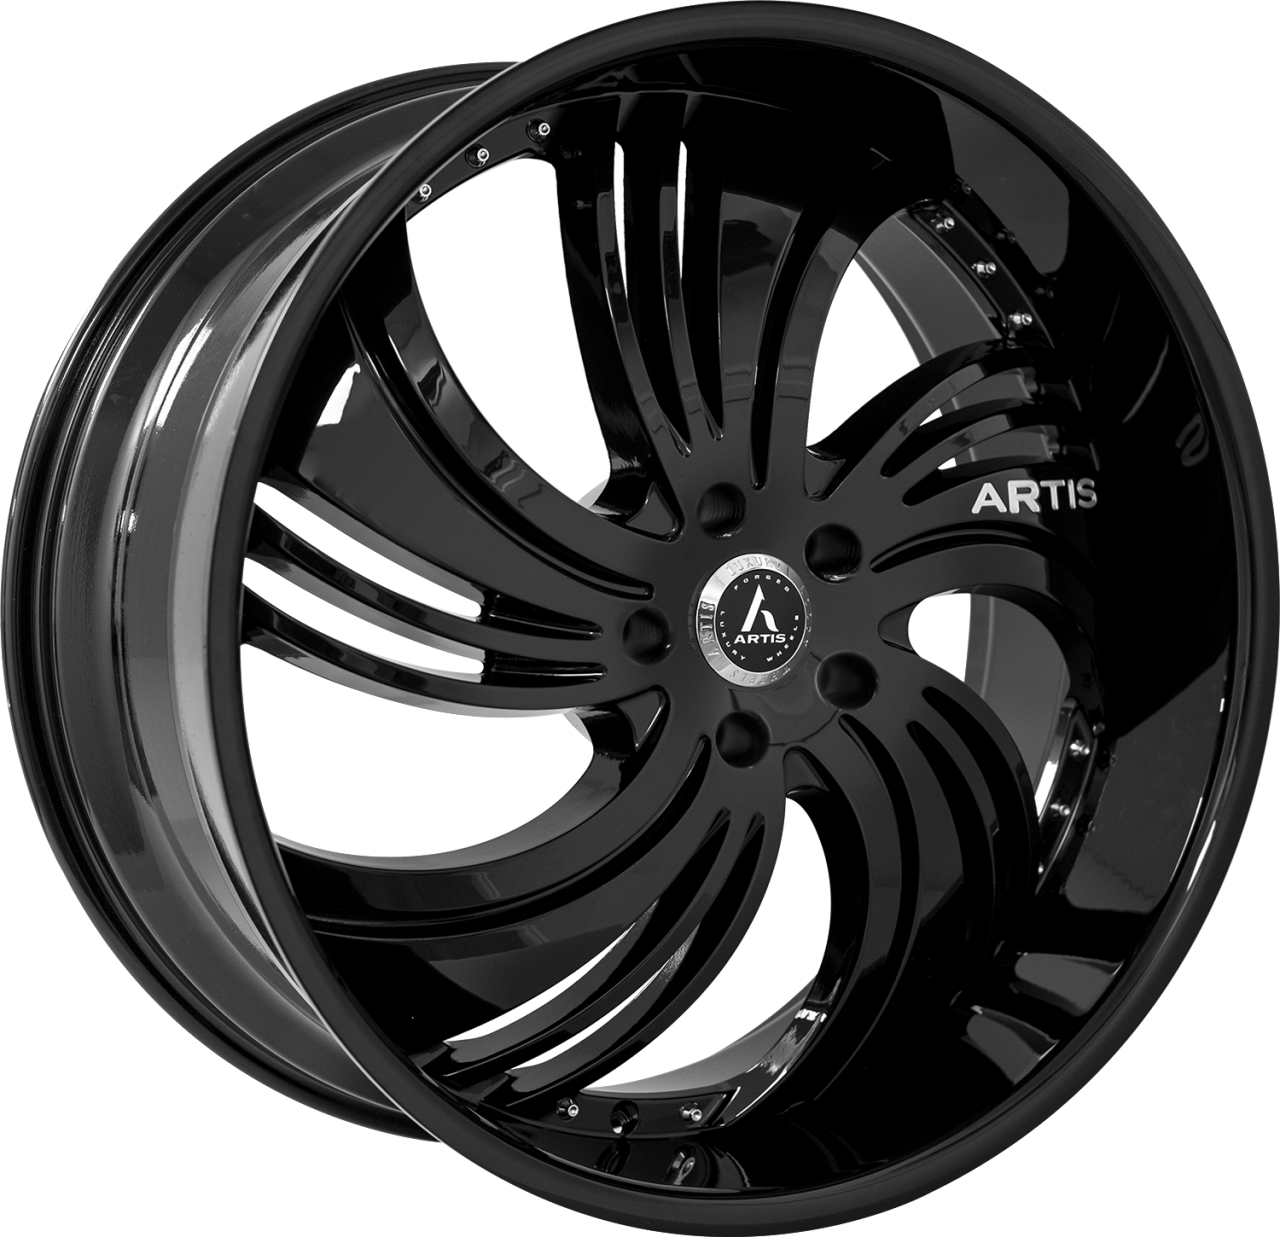 Artis Forged Avenue wheel with Full Black finish